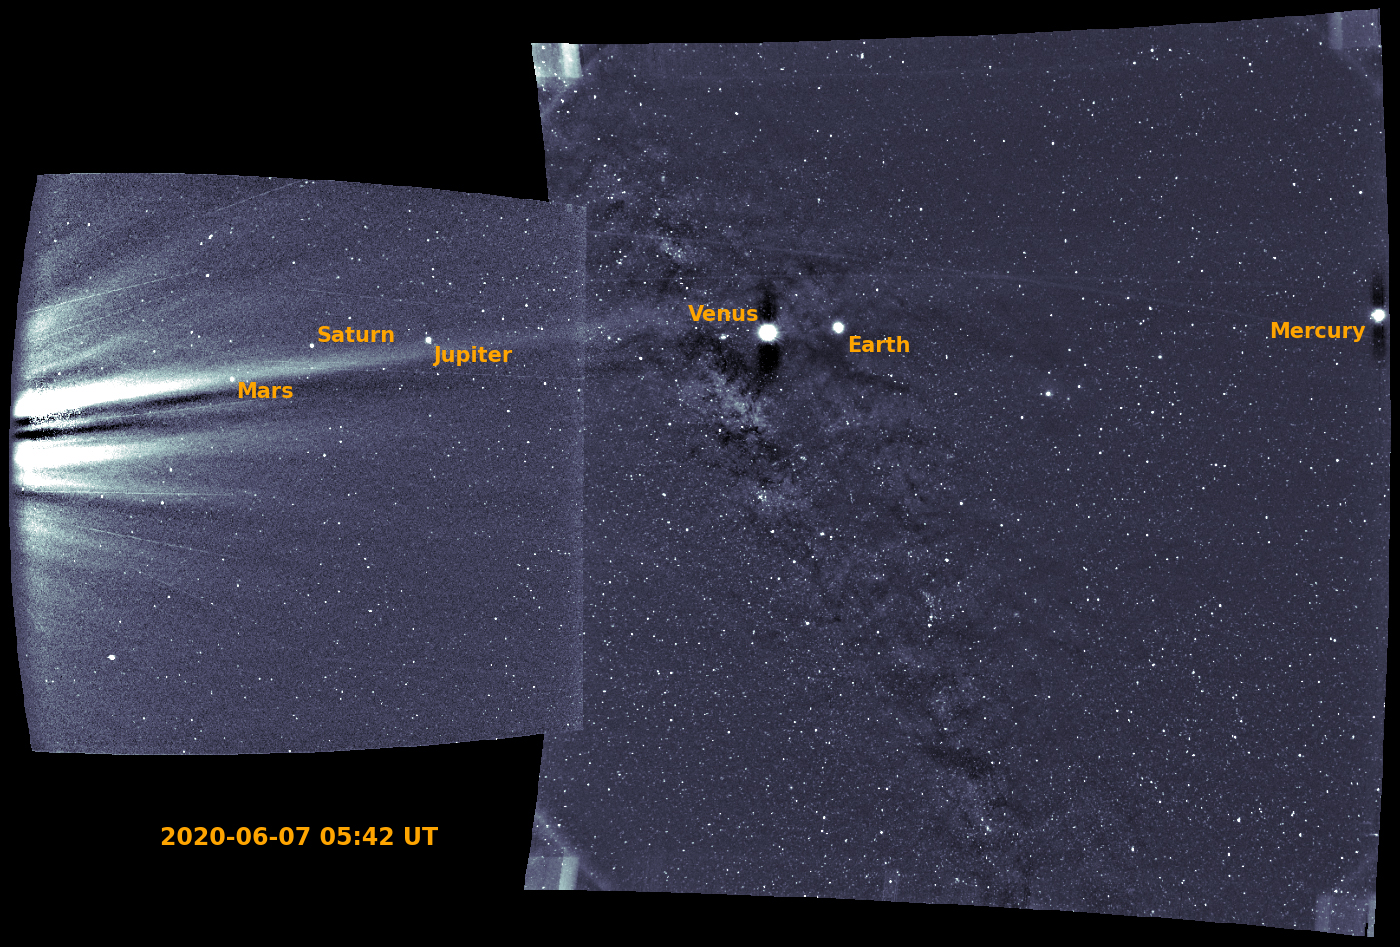 Parker Solar Probe was making a close approach to the Sun on June 7, 2020, when its Wide-field Imager for Solar PRobe (WISPR) captured the planets Mercury, Venus, Earth, Mars, Jupiter and Saturn in its field of view.